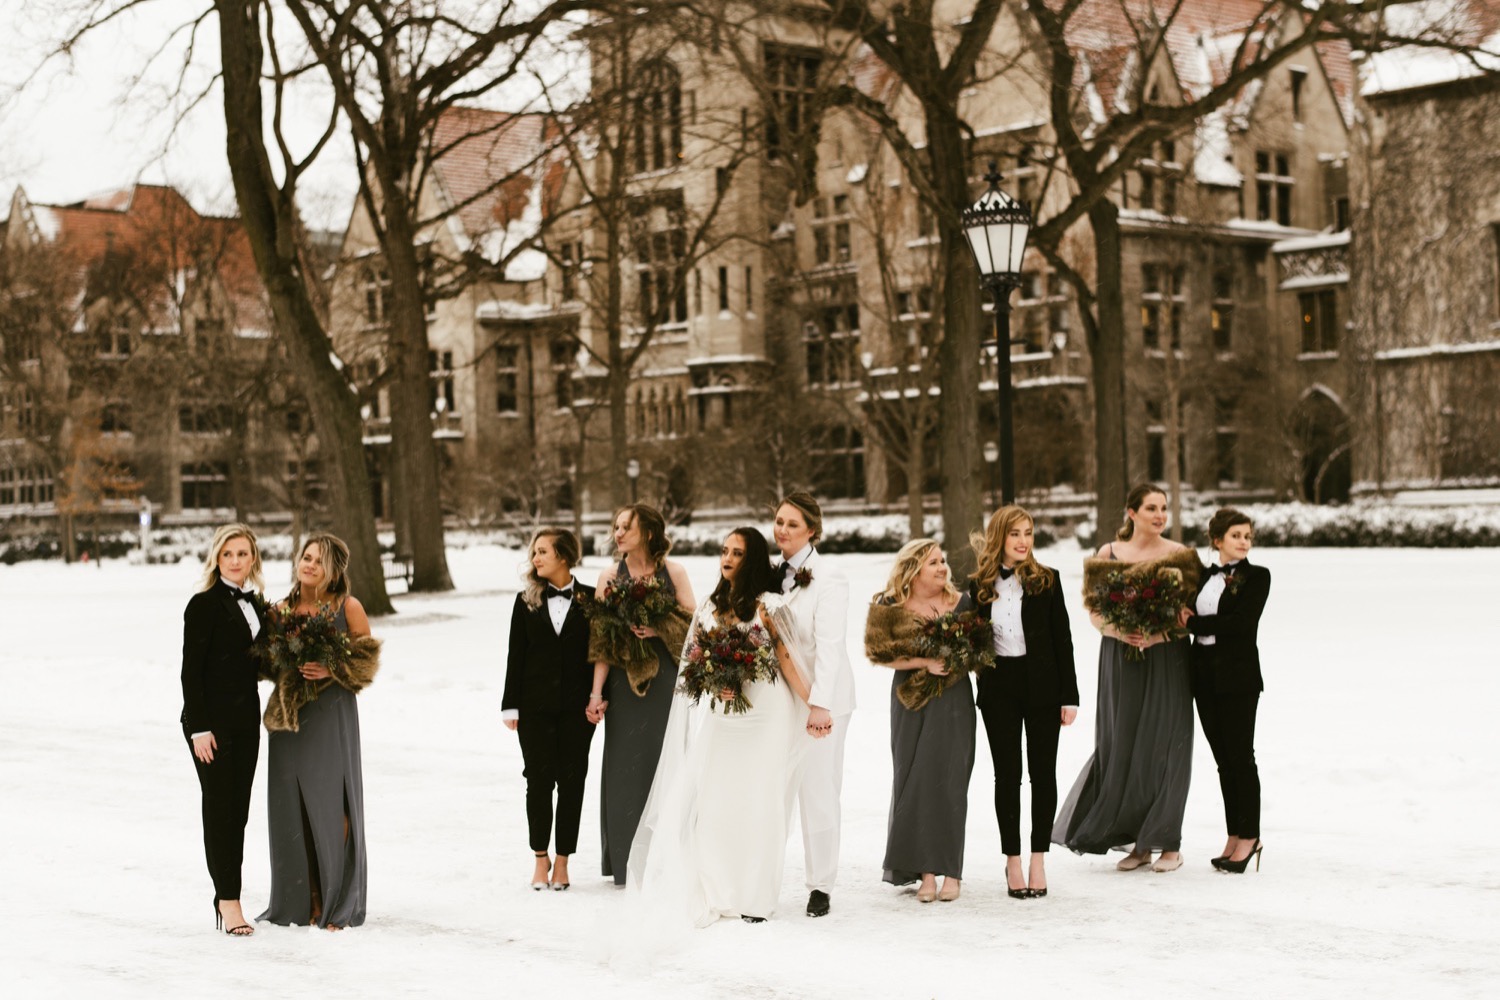 Chicago bride and her wedding party.